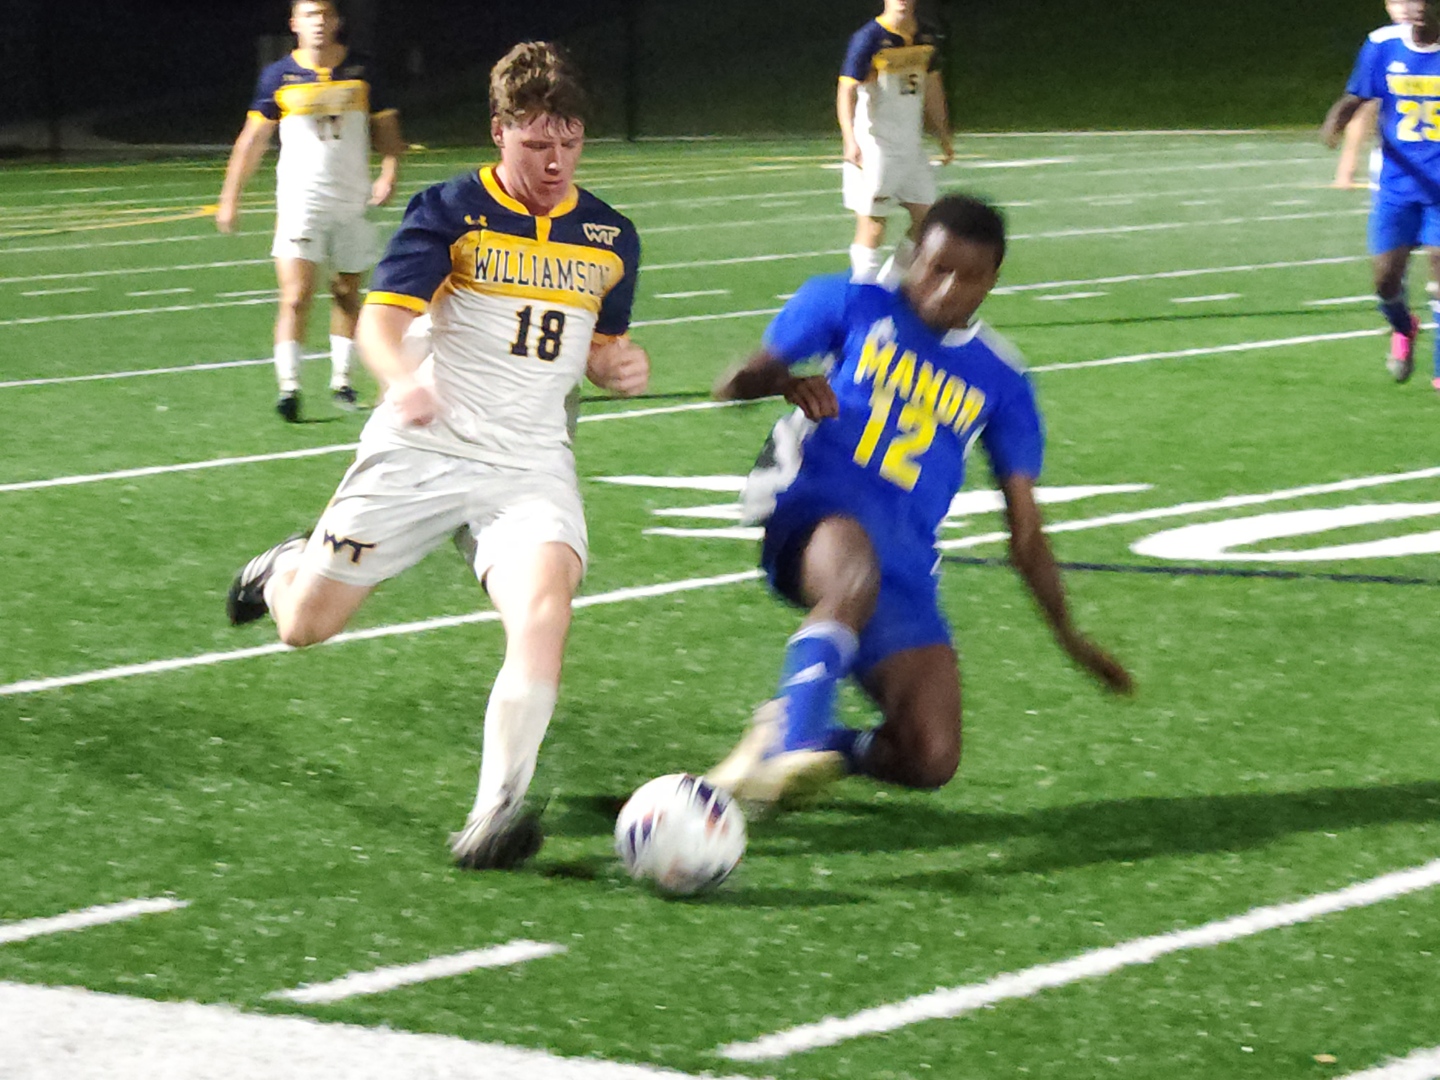 Action from Thursday night's game versus Manor